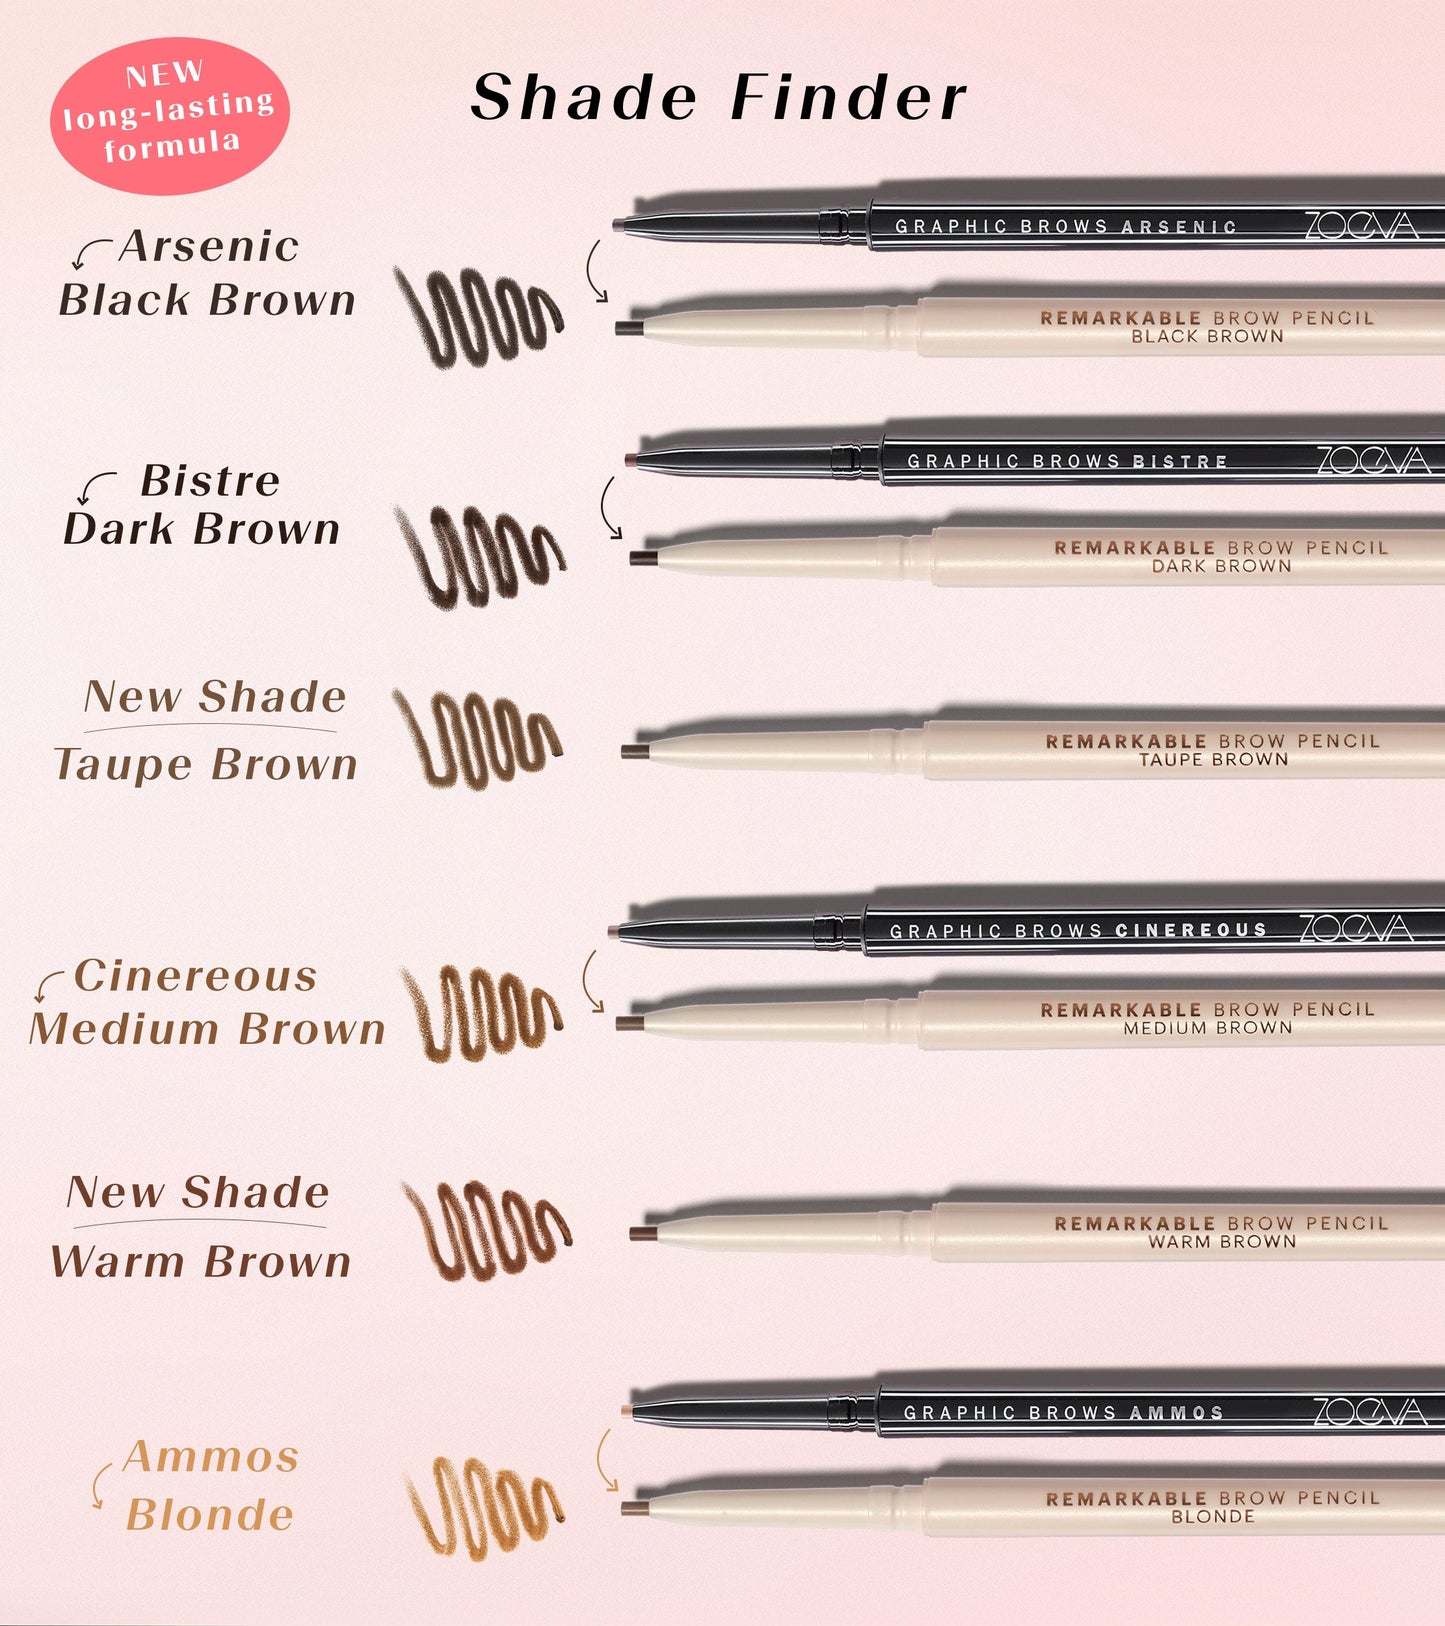 REMARKABLE BROW PENCIL (DARK BROWN) Expanded Image 5